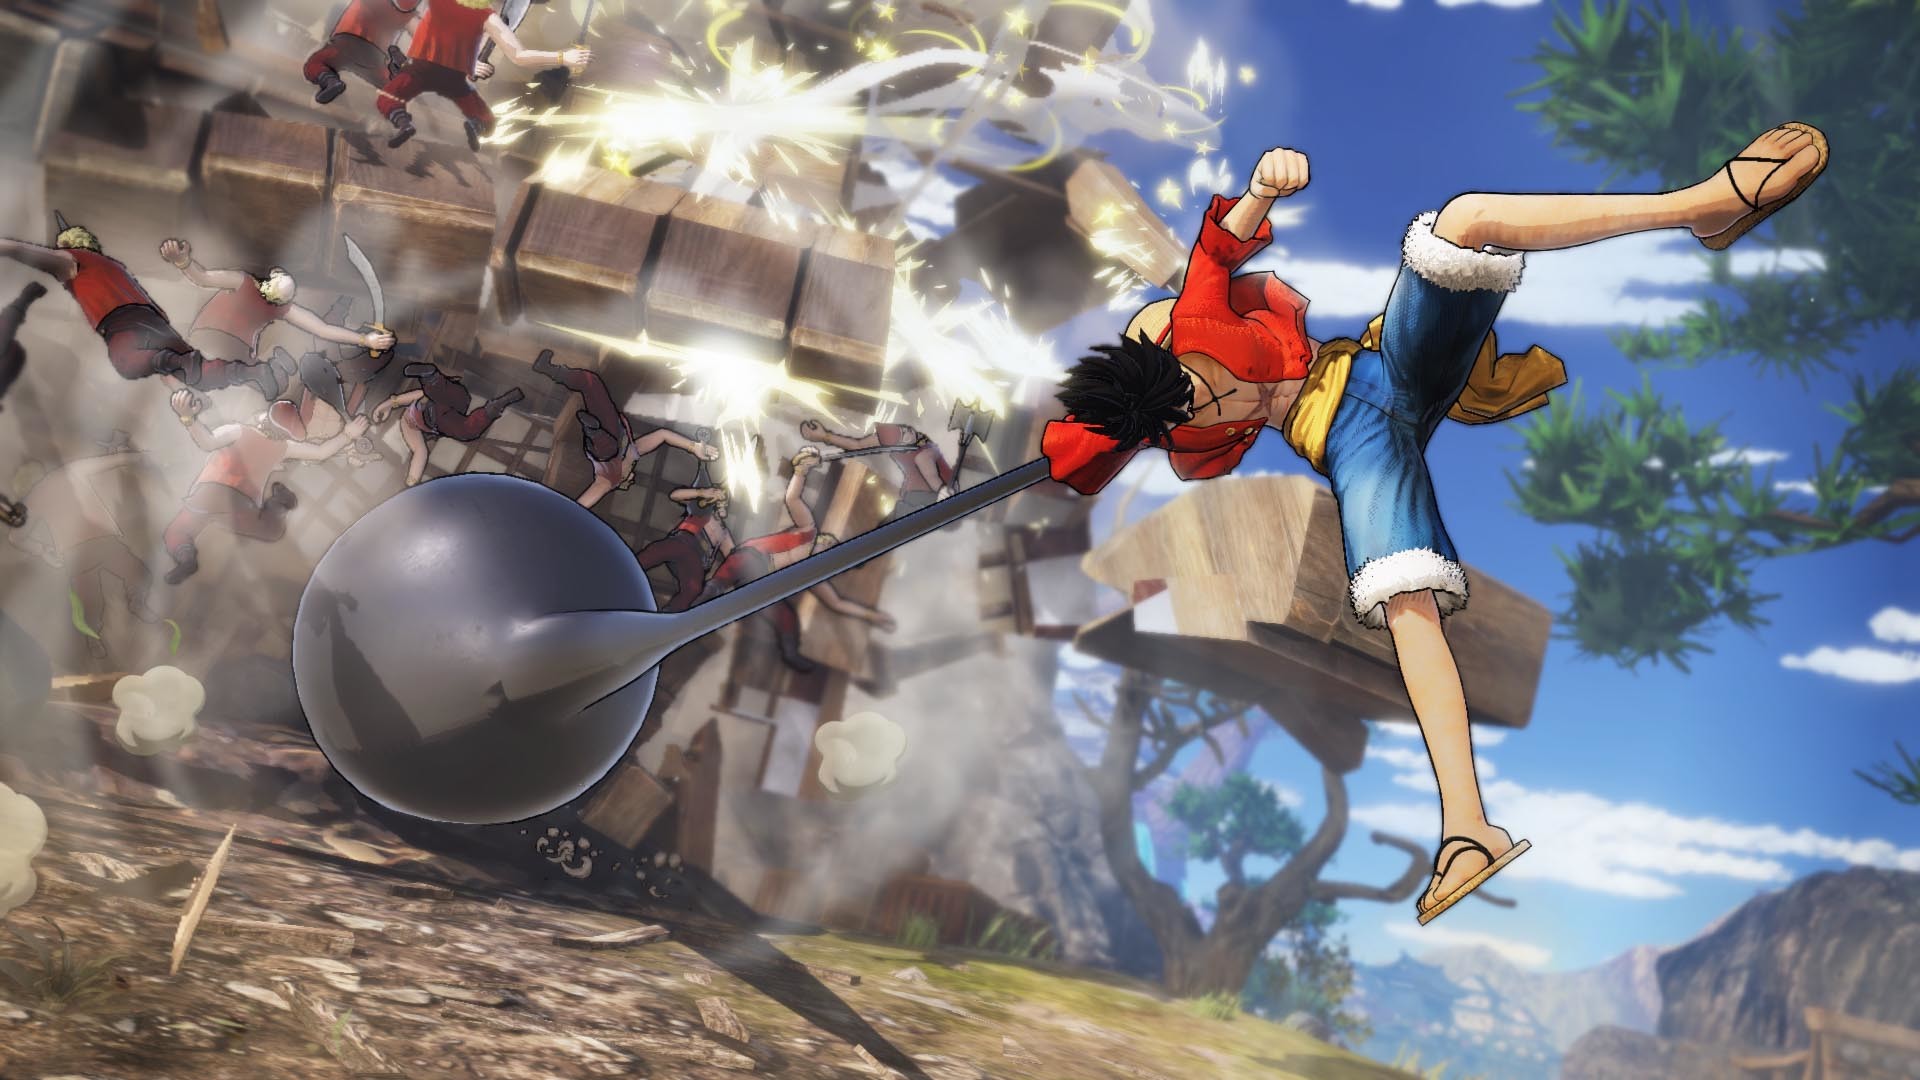 ONE PIECE: PIRATE WARRIORS 4 Free Download